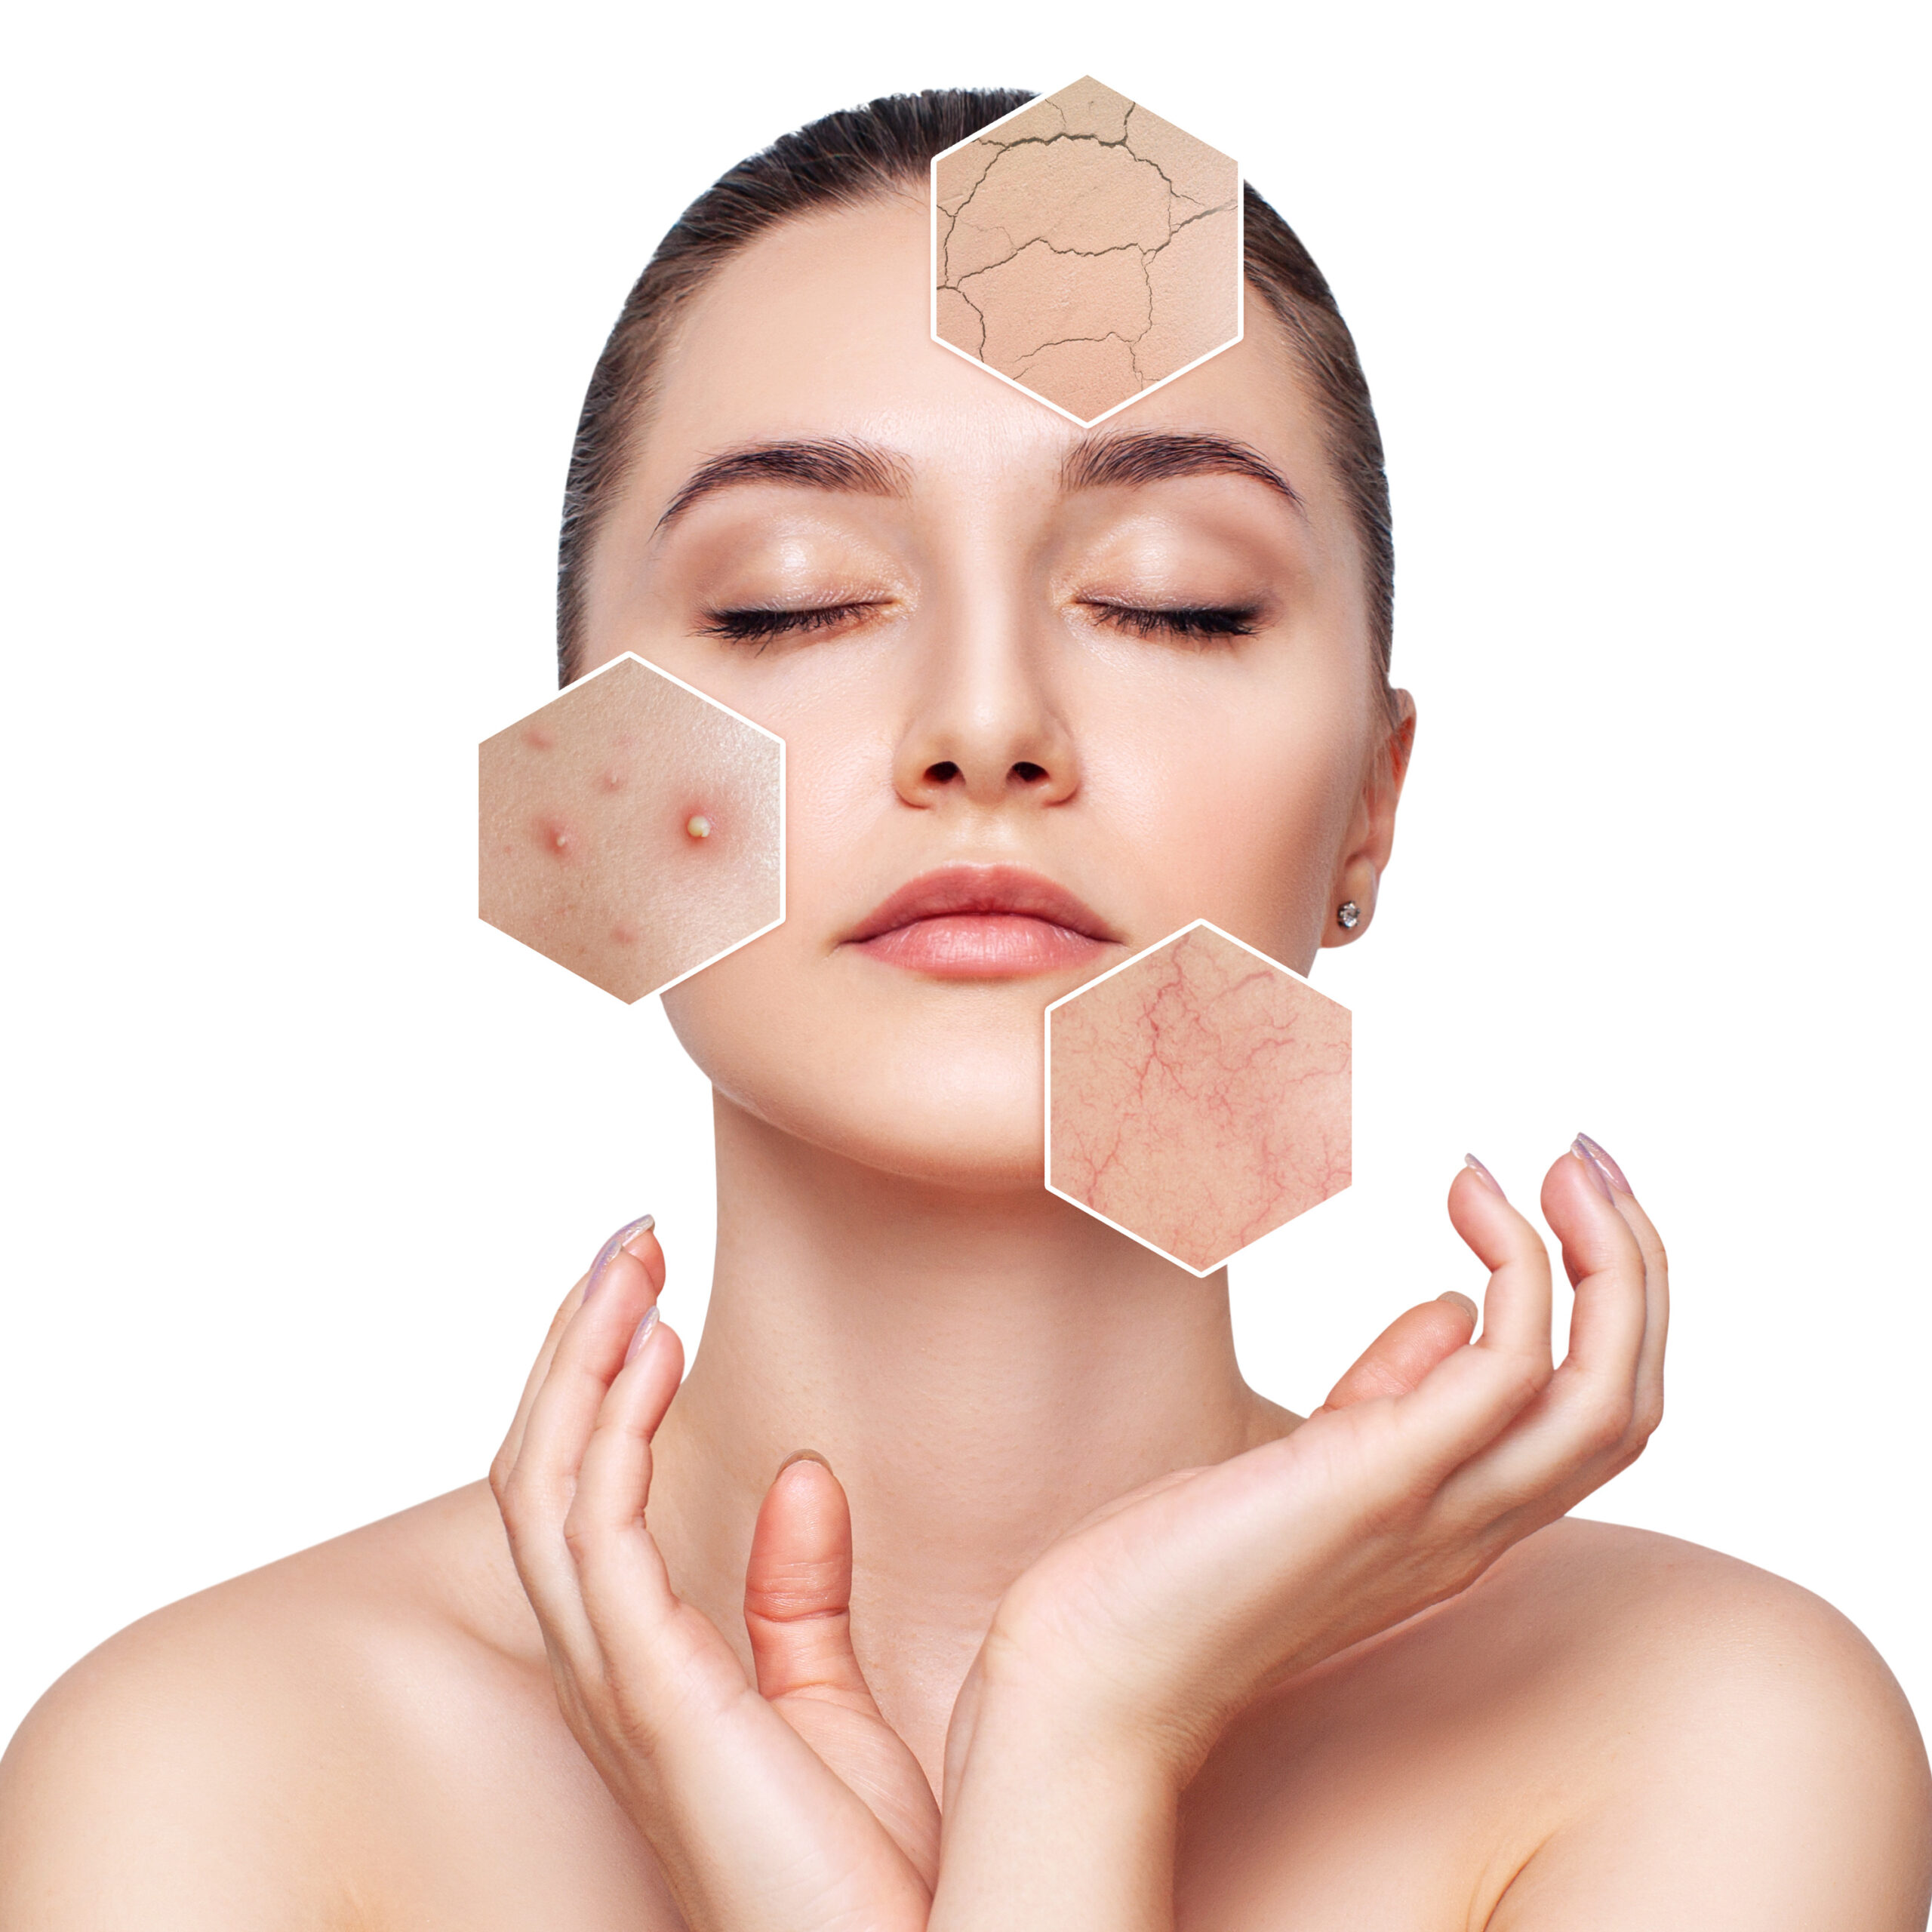 Young woman with couperose and acne on face skin. Zoom hexagon shows skin problems. Isolated on white.